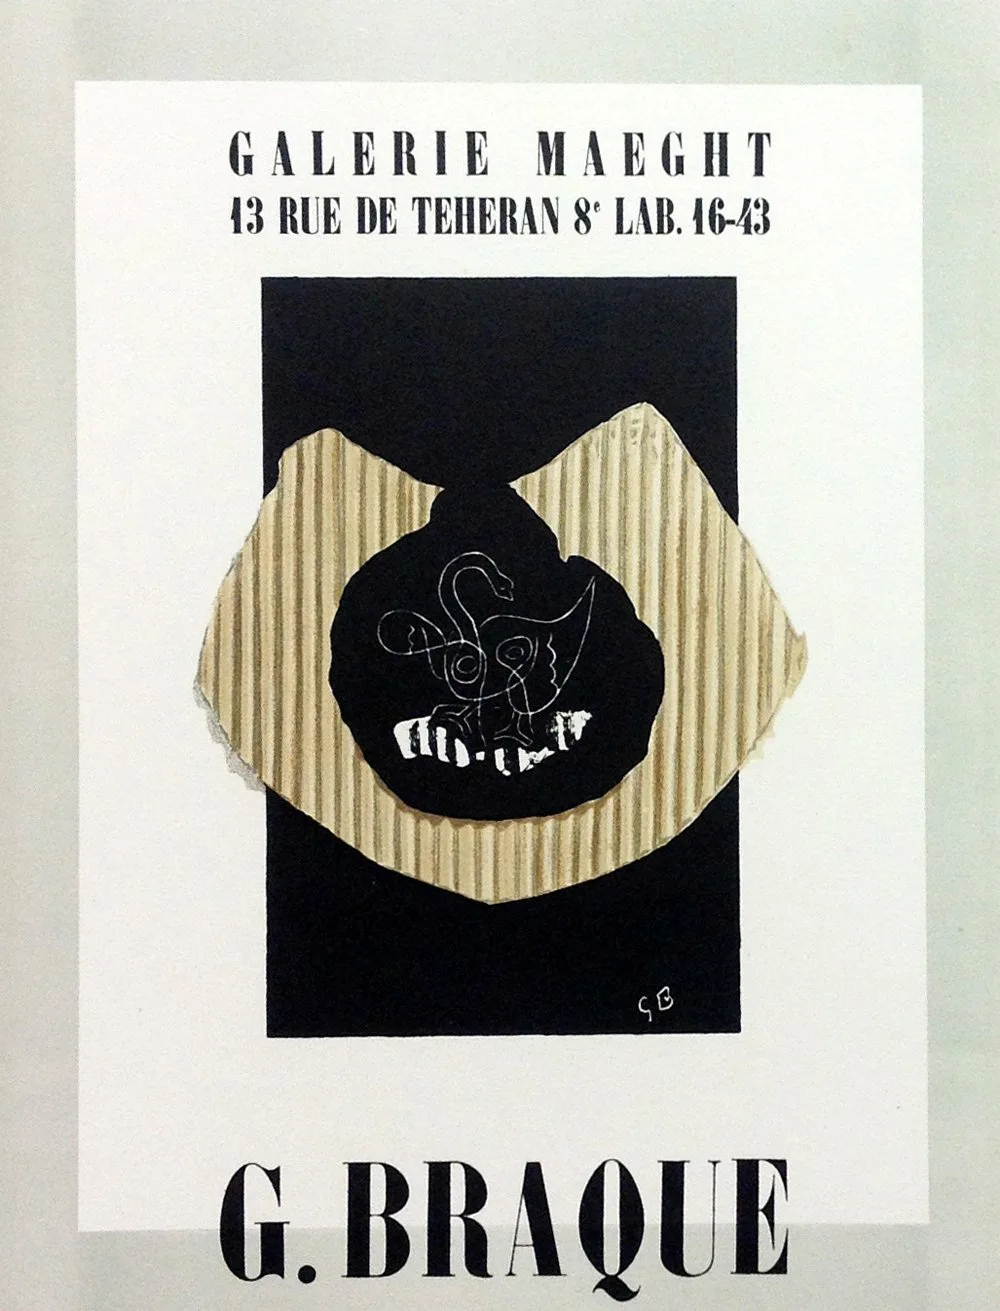 Braque 1 "Maeght Galerie 1943" Mourlot 1959 Art in posters